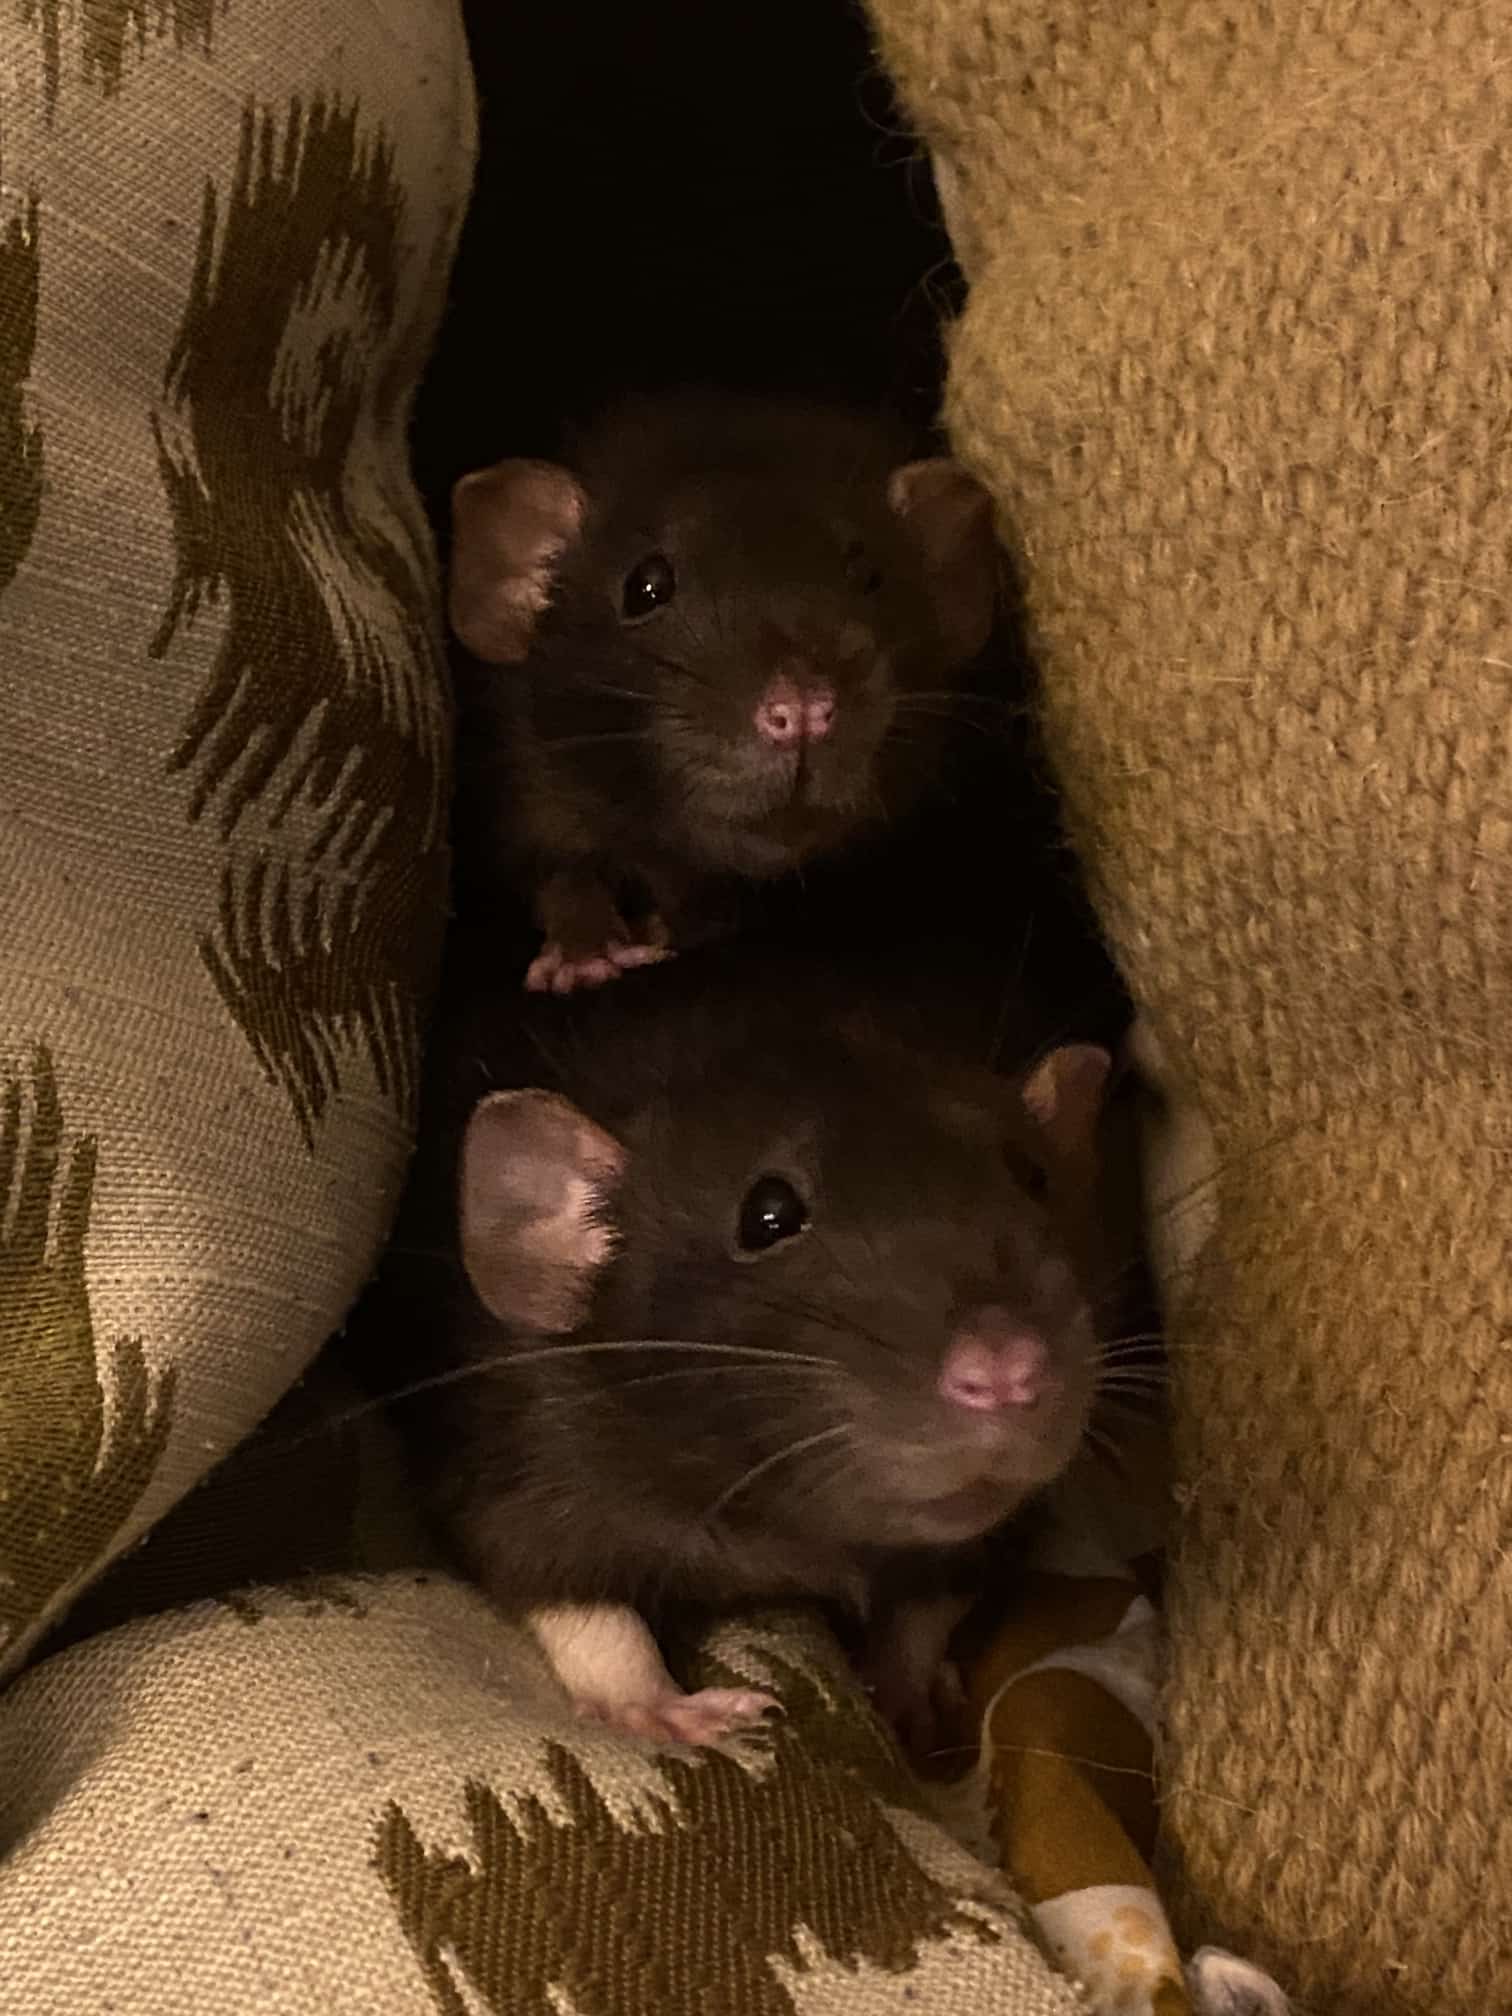 Tina has really cute rats that stack on top of each other